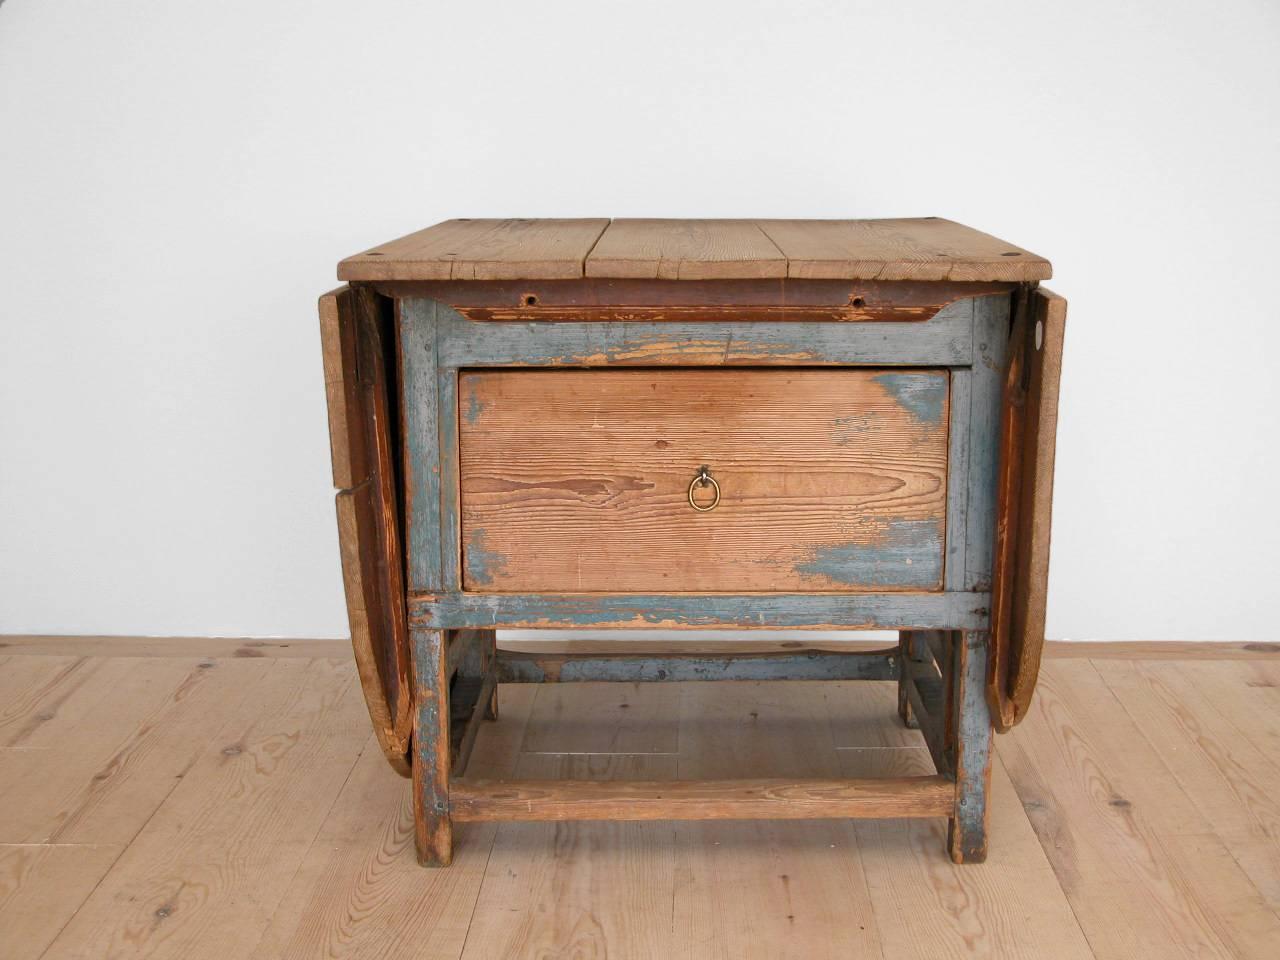 An exceptional Swedish, Allmoge drop-leaf farm table with center drawer, circa 1820, origin: Northern Sweden. All original blue paint with a beautiful patina.  The purity of the design, still modern almost Judd-like in its form, are quintessential